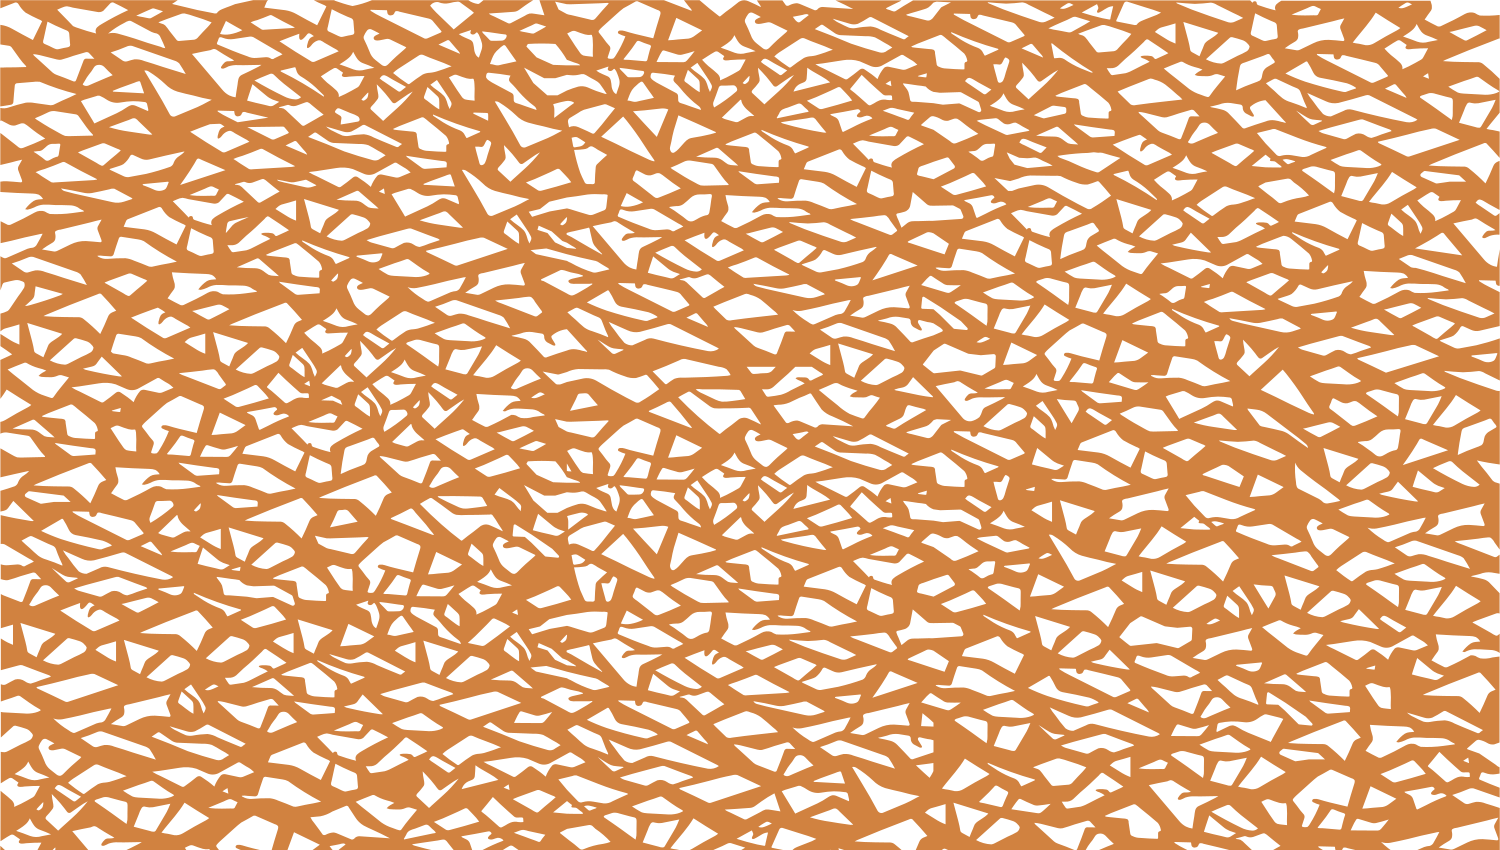 Parasoleil™ Taiga© pattern displayed with a ochre color overlay